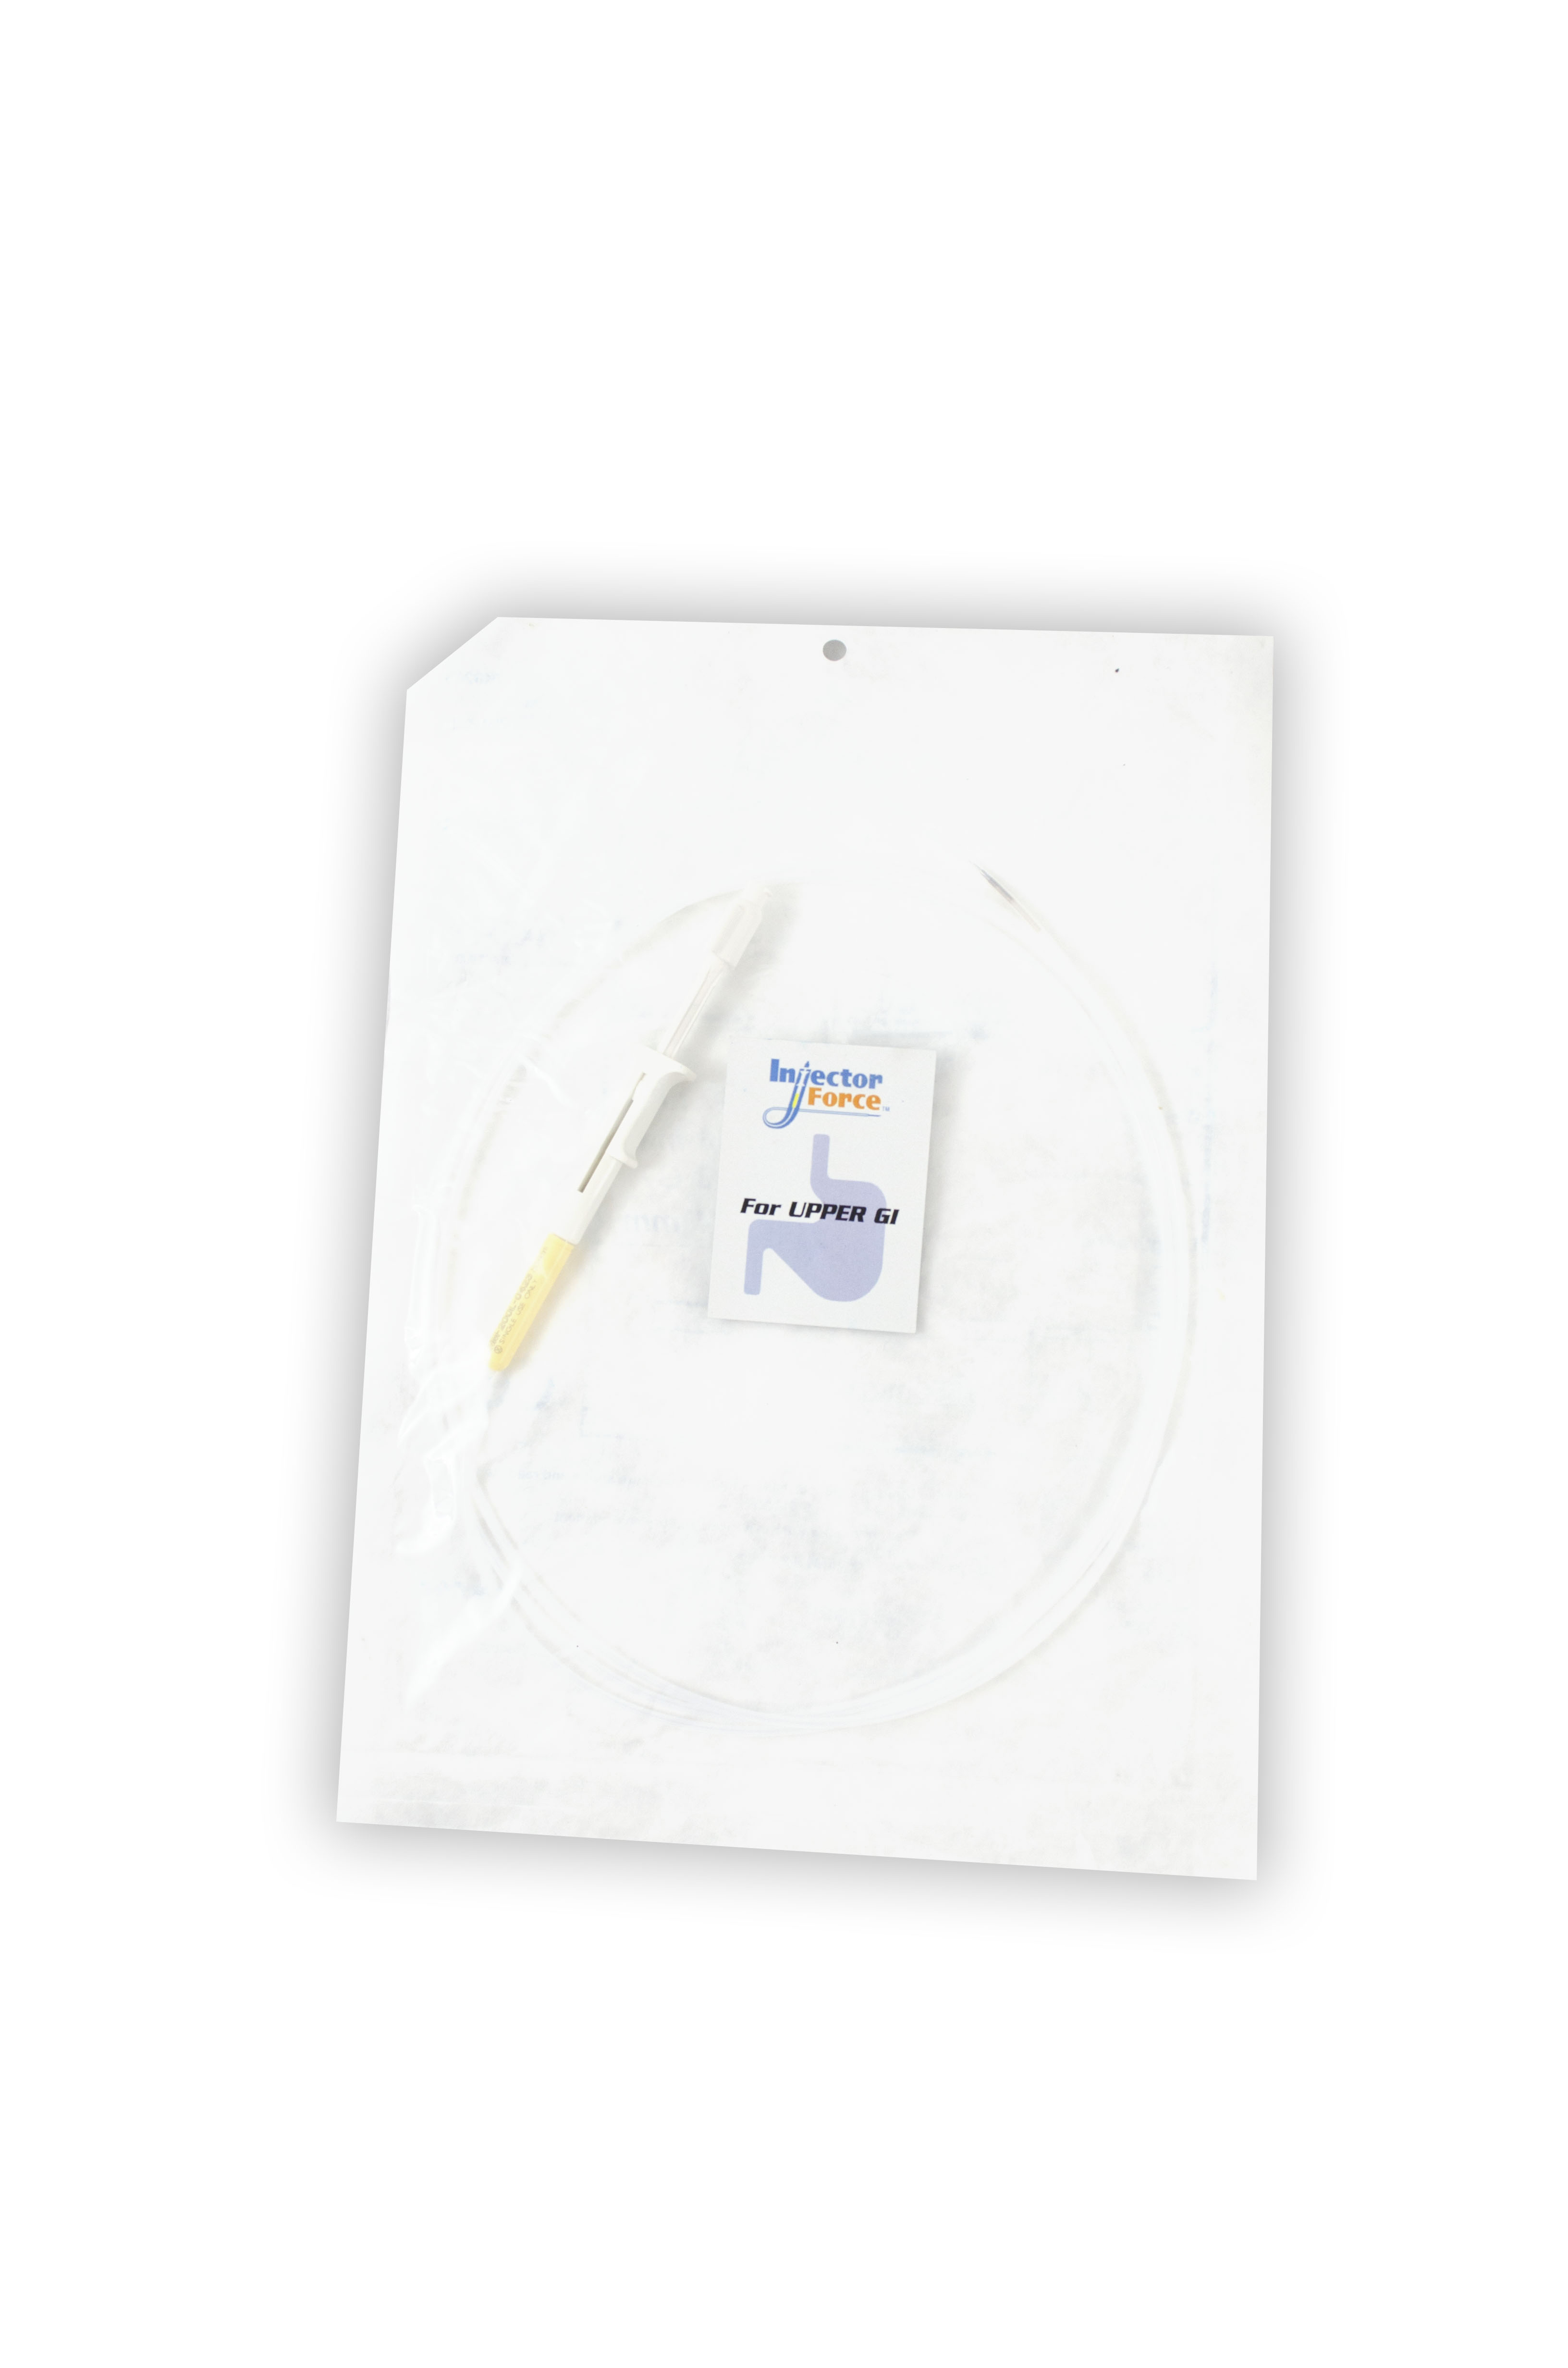 [Out-of-Date] Olympus Disposable Injection Needle - NM-200L-0423